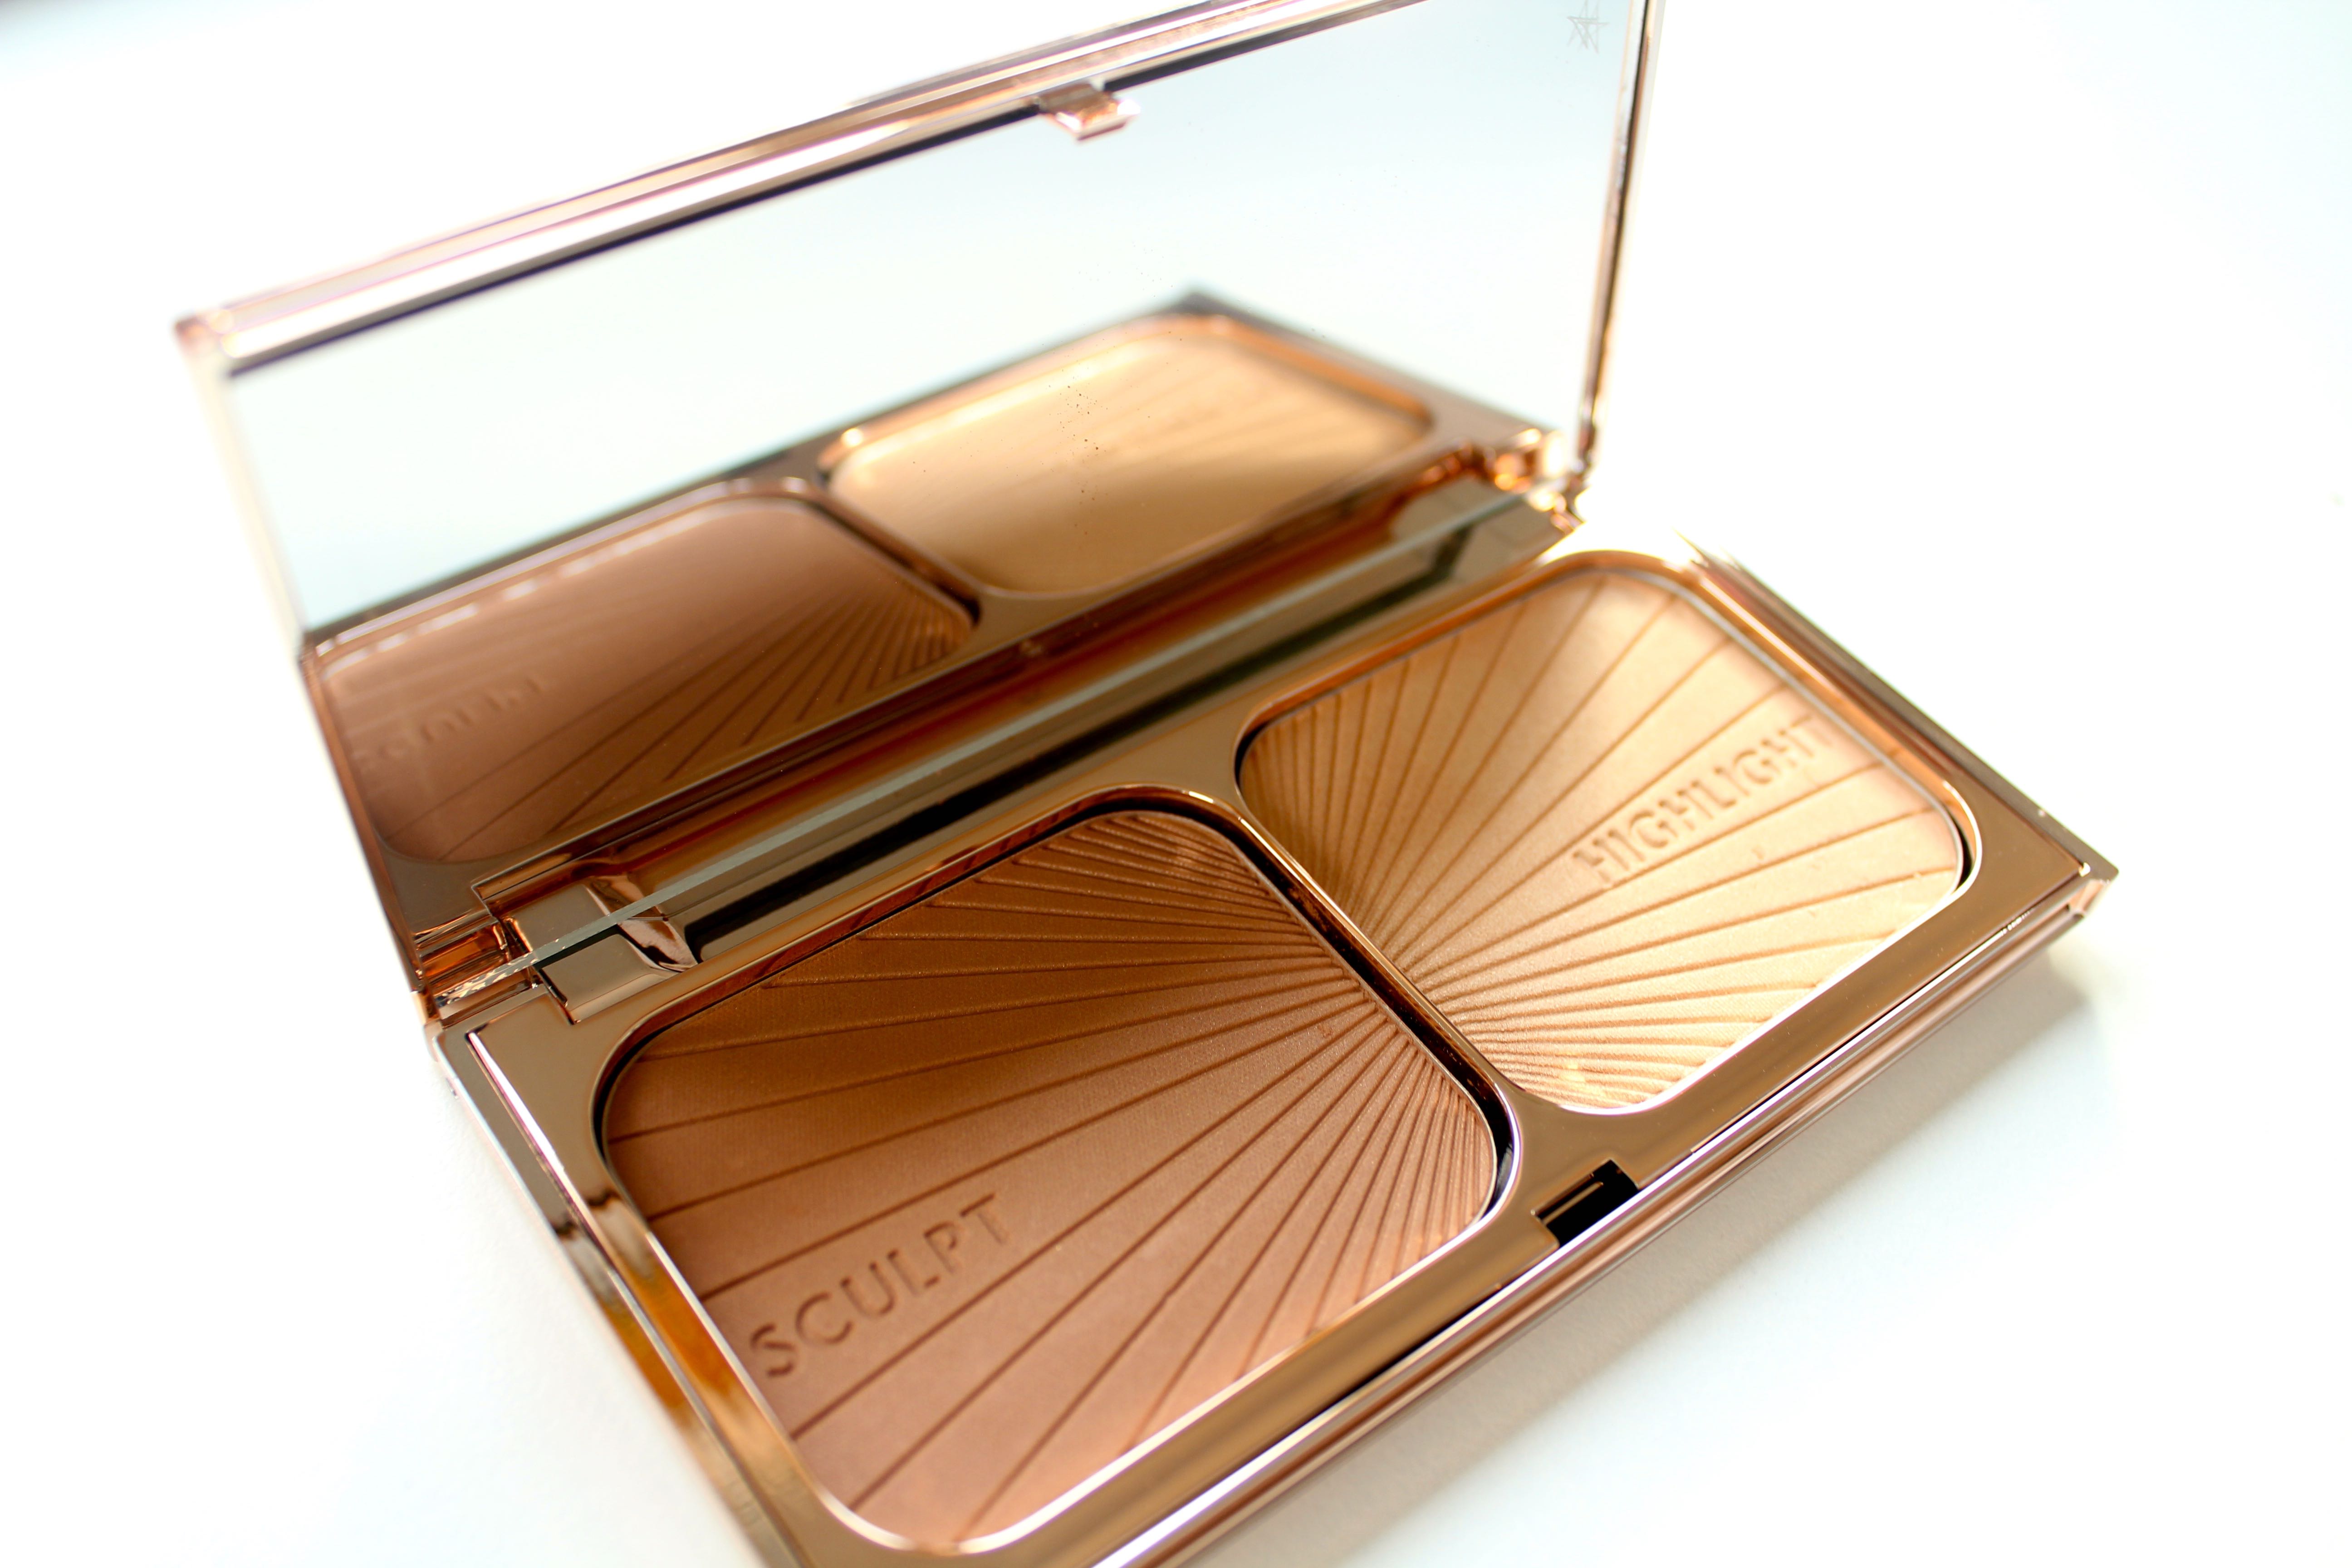 Charlotte-Tilbury-haul-and-product-review-all-in-one-Filmstar-Bronze-and-Glow-up-by-face-made-up-facemadeup